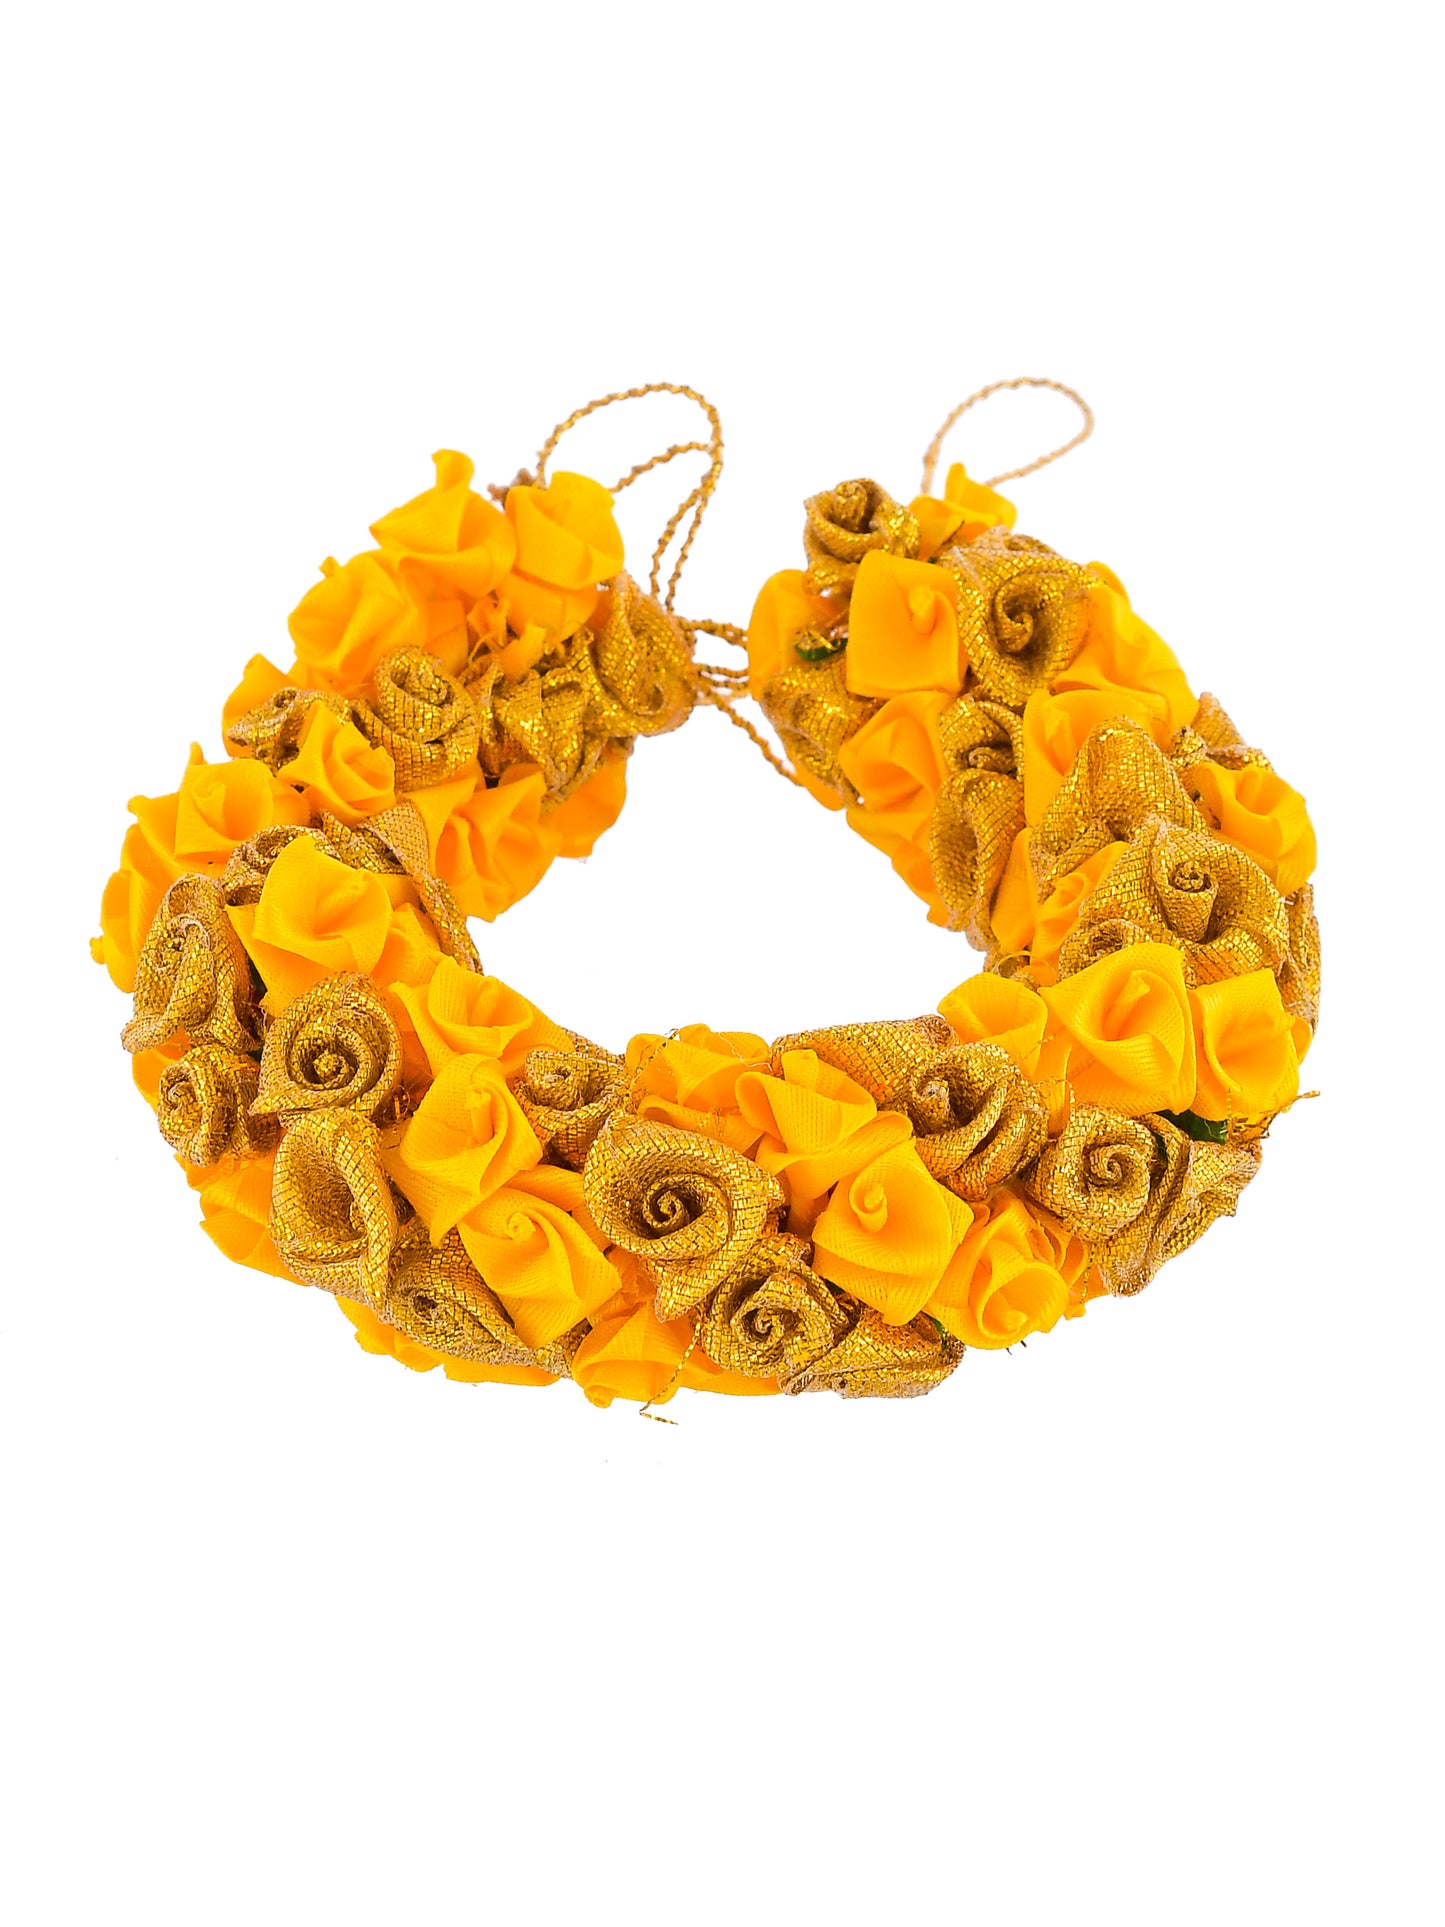 Yellow and Golden Ribbon Floral Hair Accessory Set